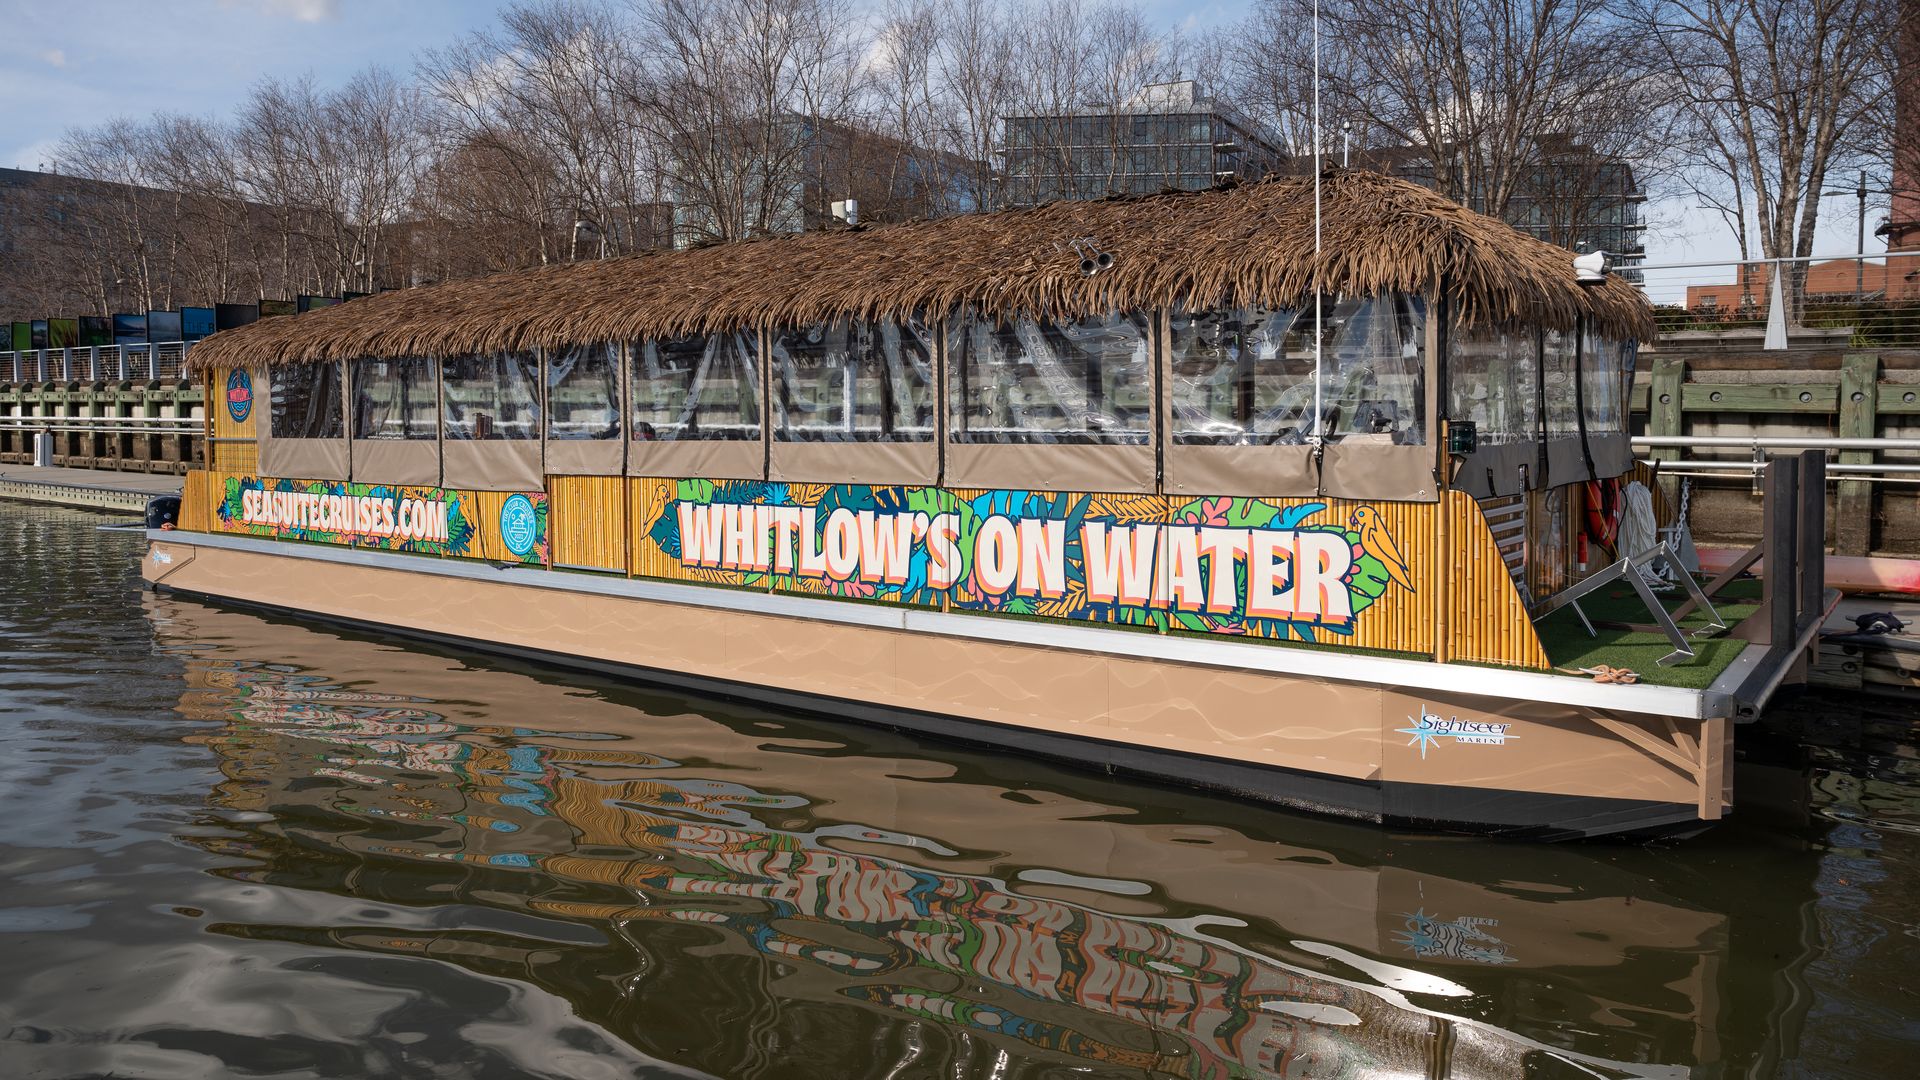 A tiki boat covered in brown thatched roof with a colorful "Whitlow's on the Water" decal